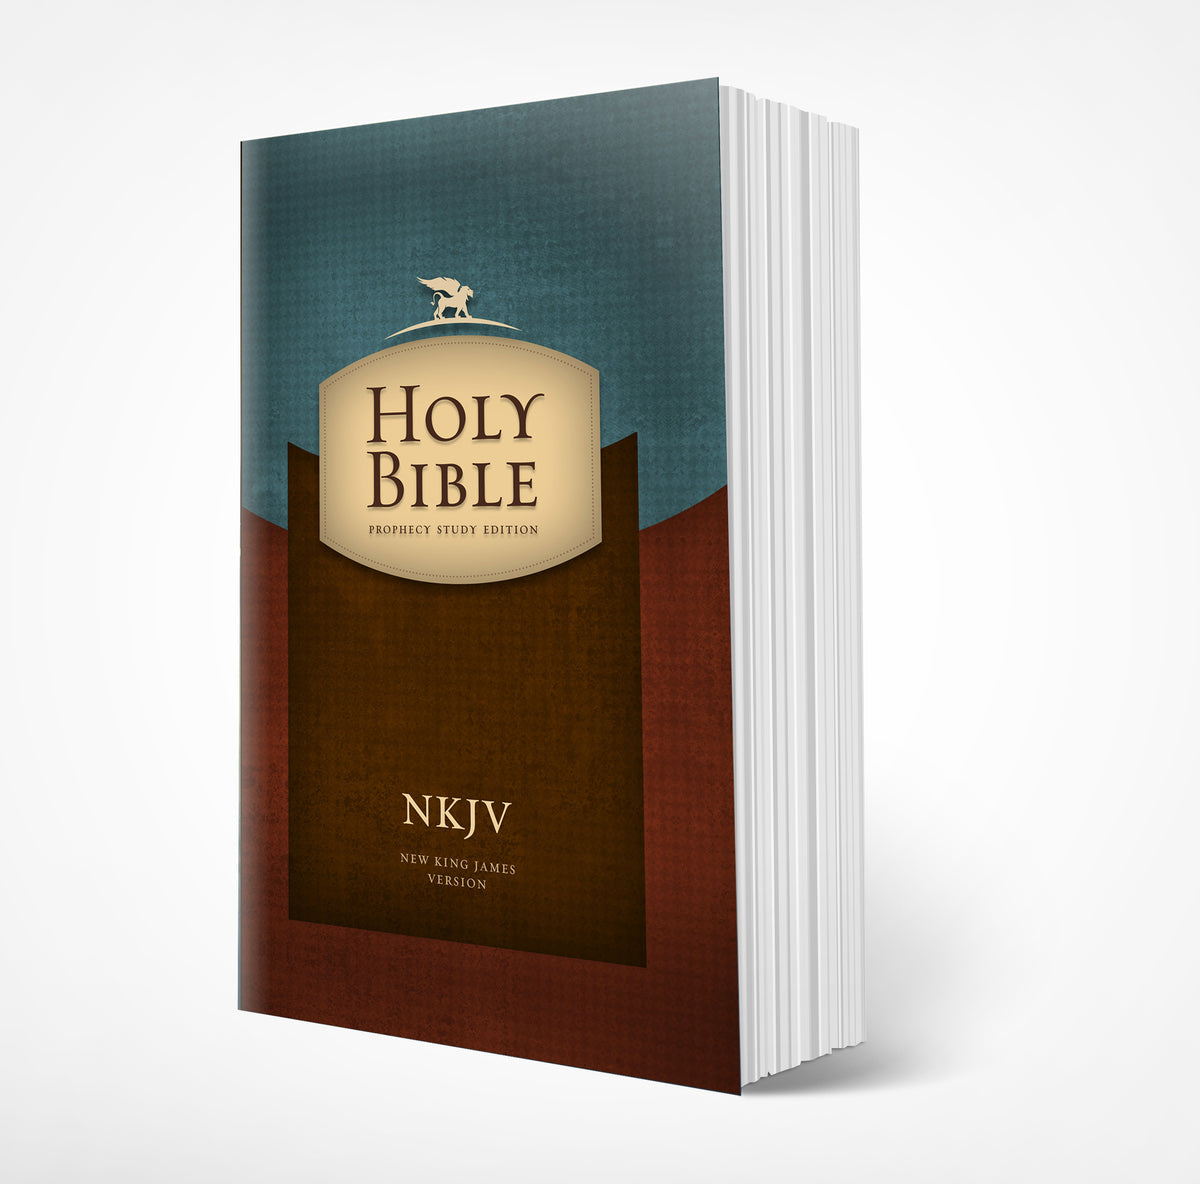 NKJV Prophecy Study Bible (Paperback) by Amazing Facts